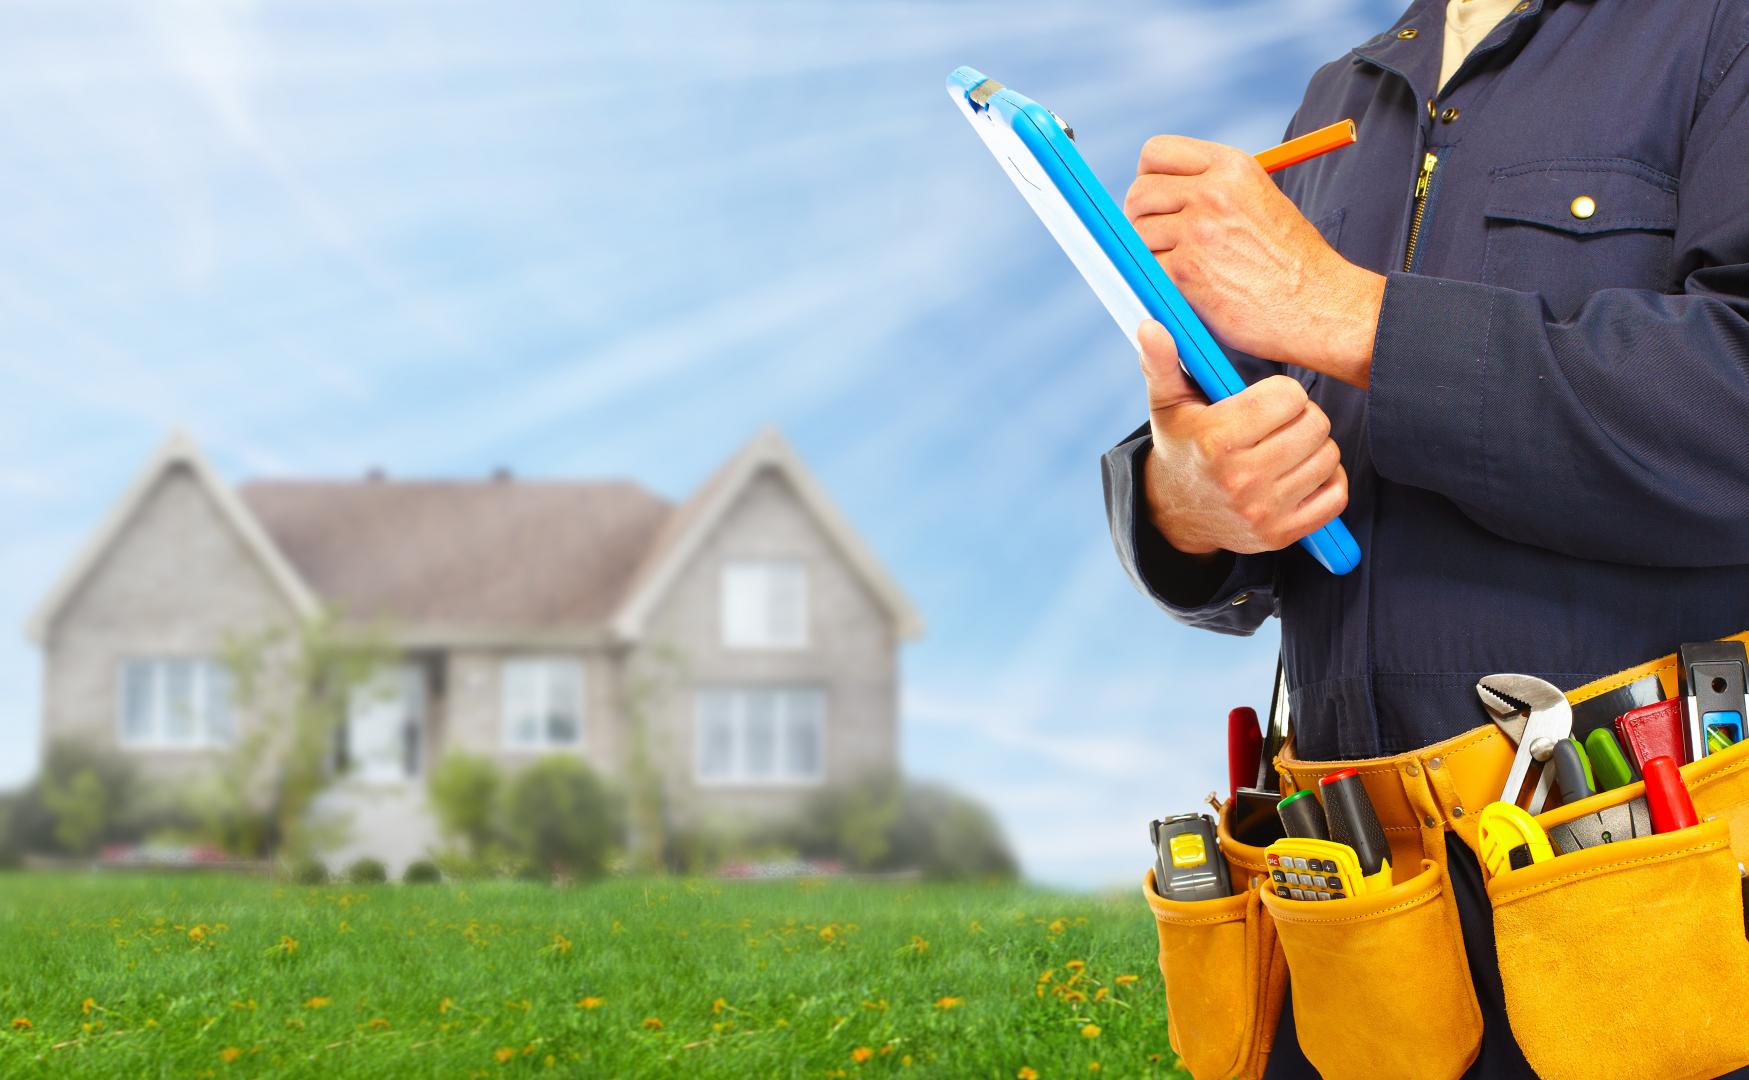 Summer Home Maintenance Checklist: How to Get Ready for the Season